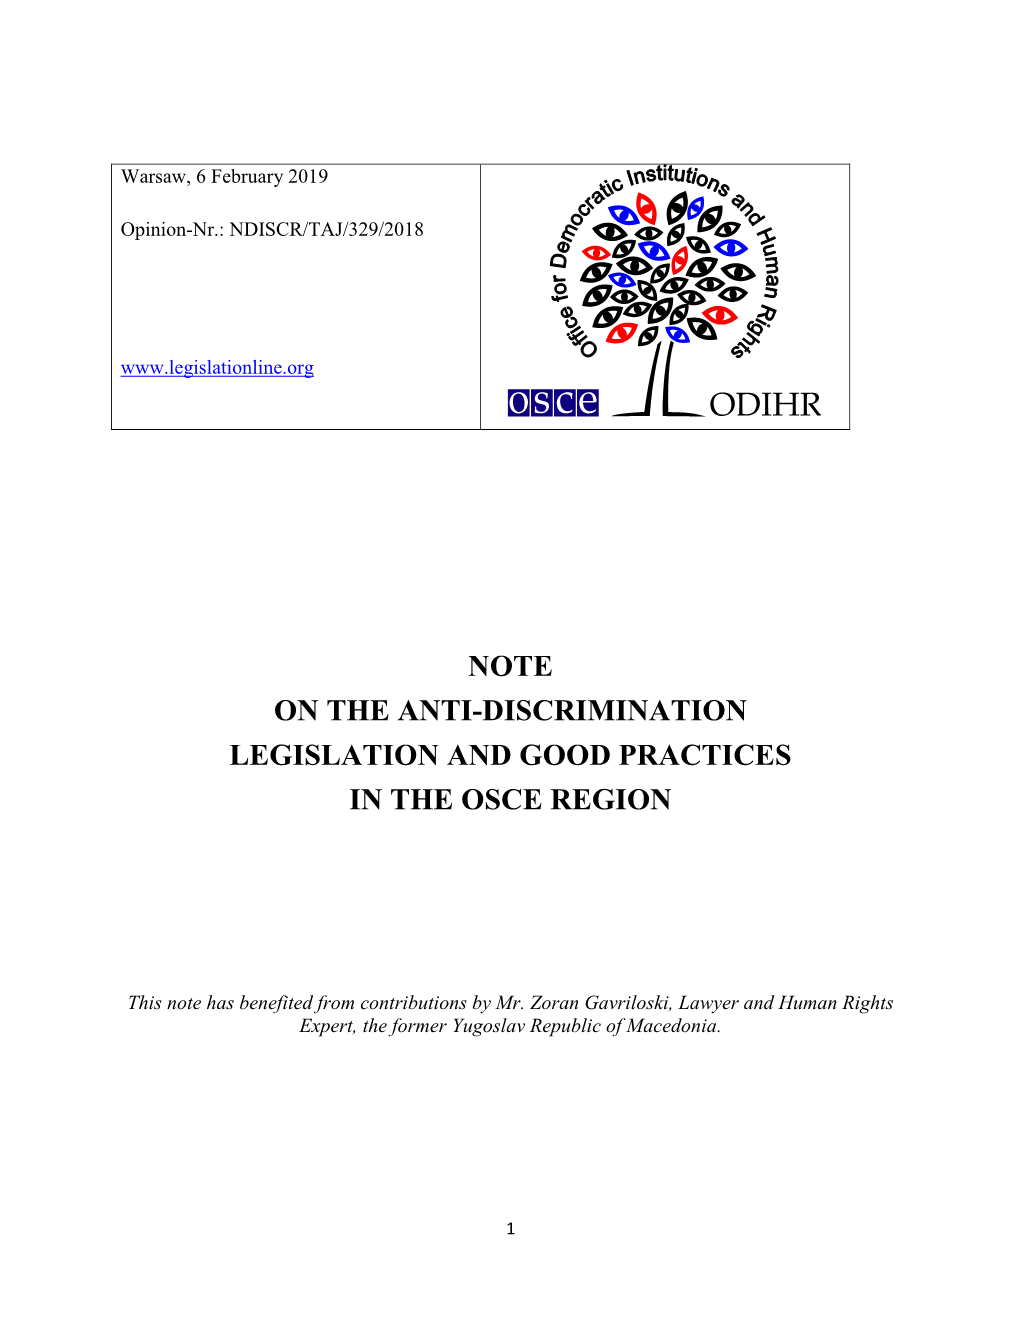 Note on the Anti-Discrimination Legislation and Good Practices in the Osce Region